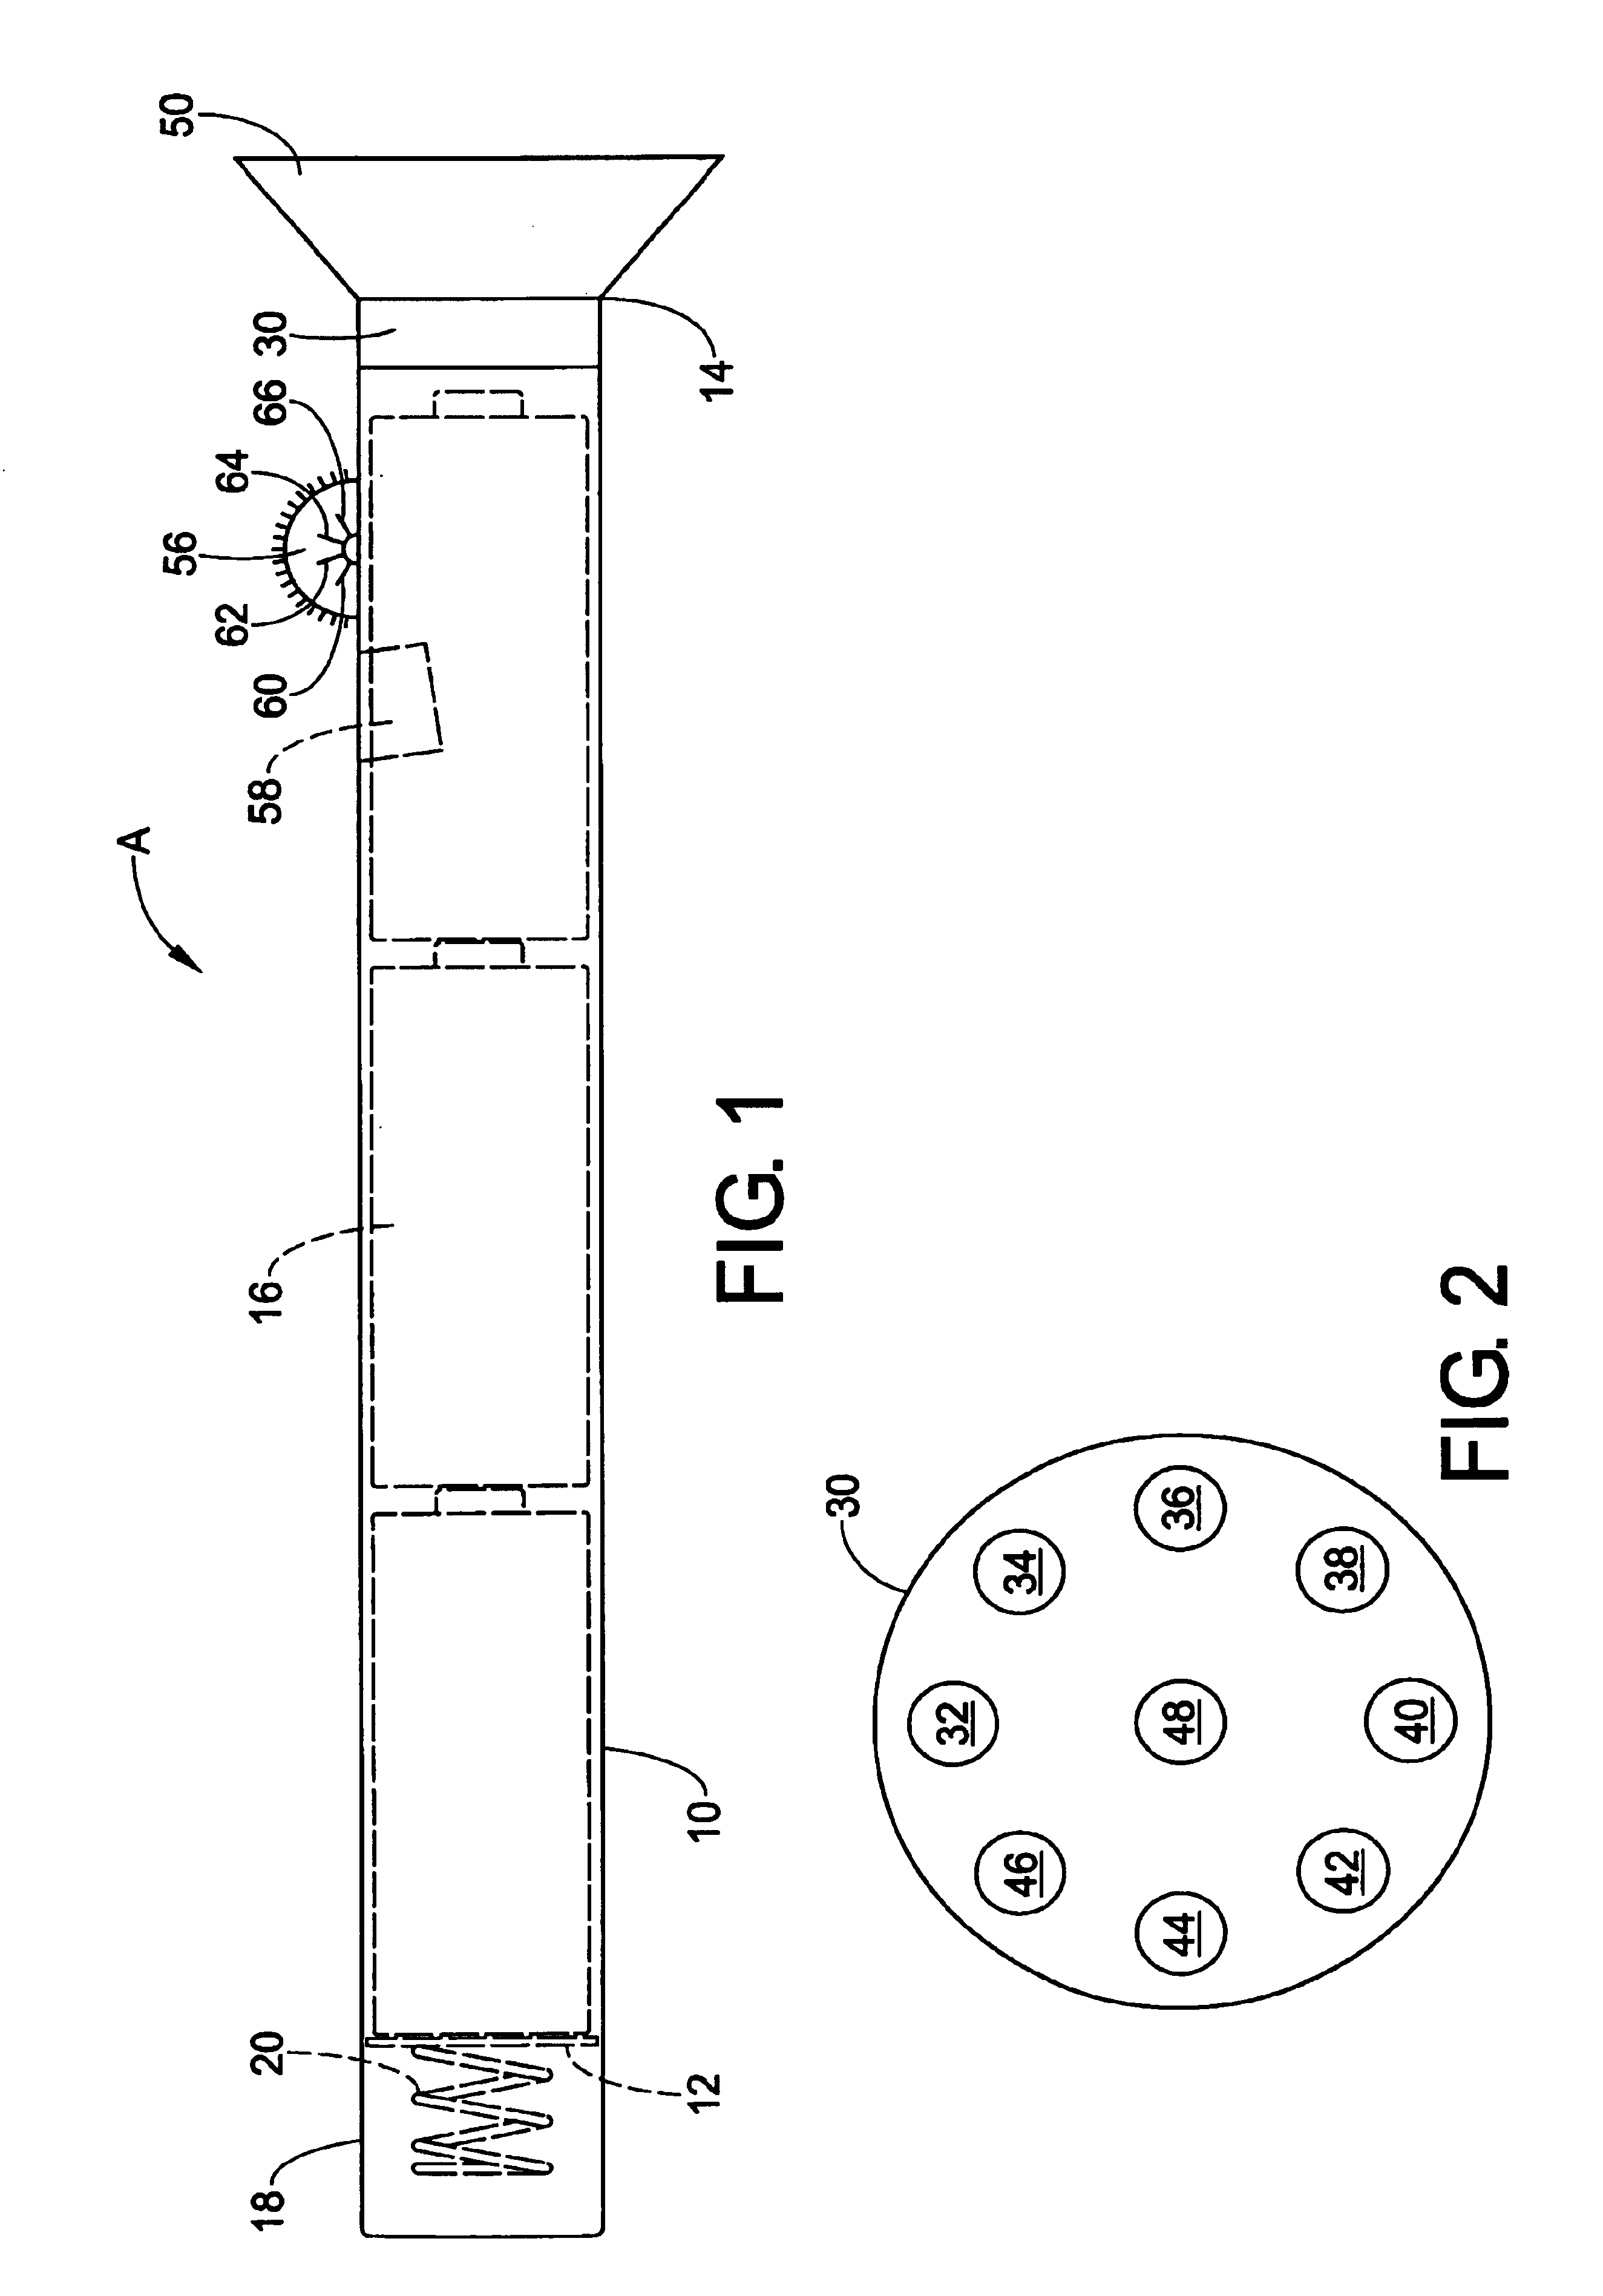 Flashlight with light emitting diode source